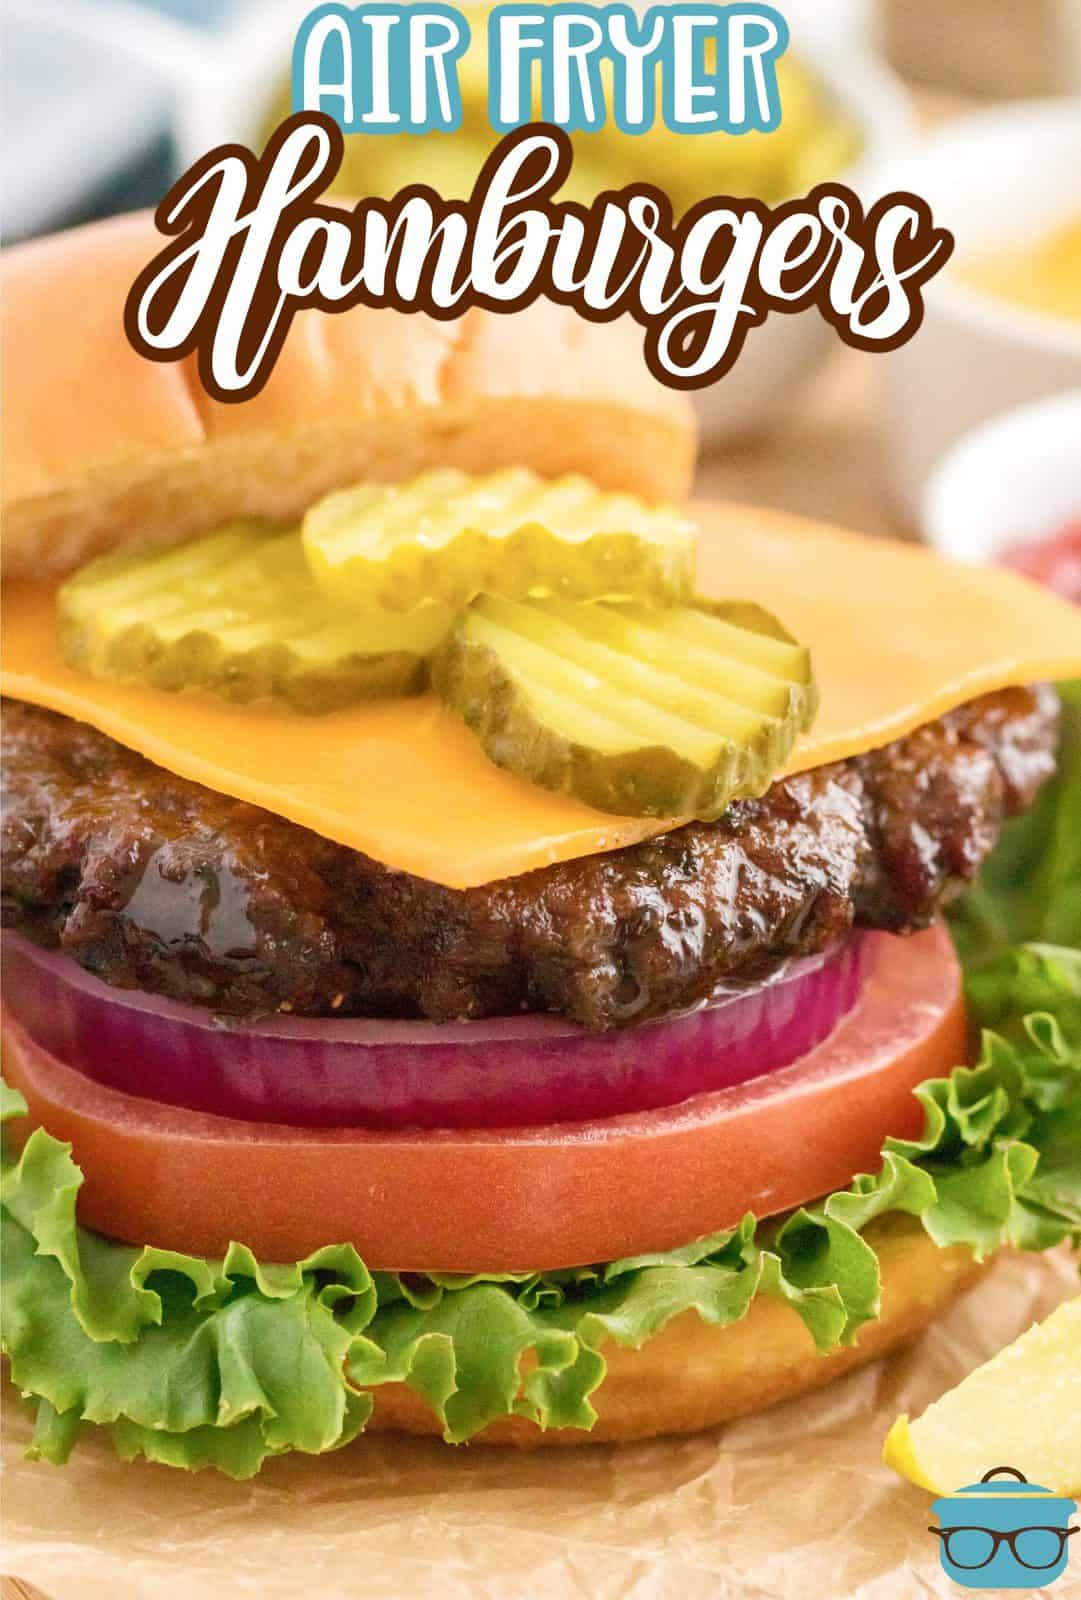 Pinterest image of Air Fryer Hamburgers with toppings.